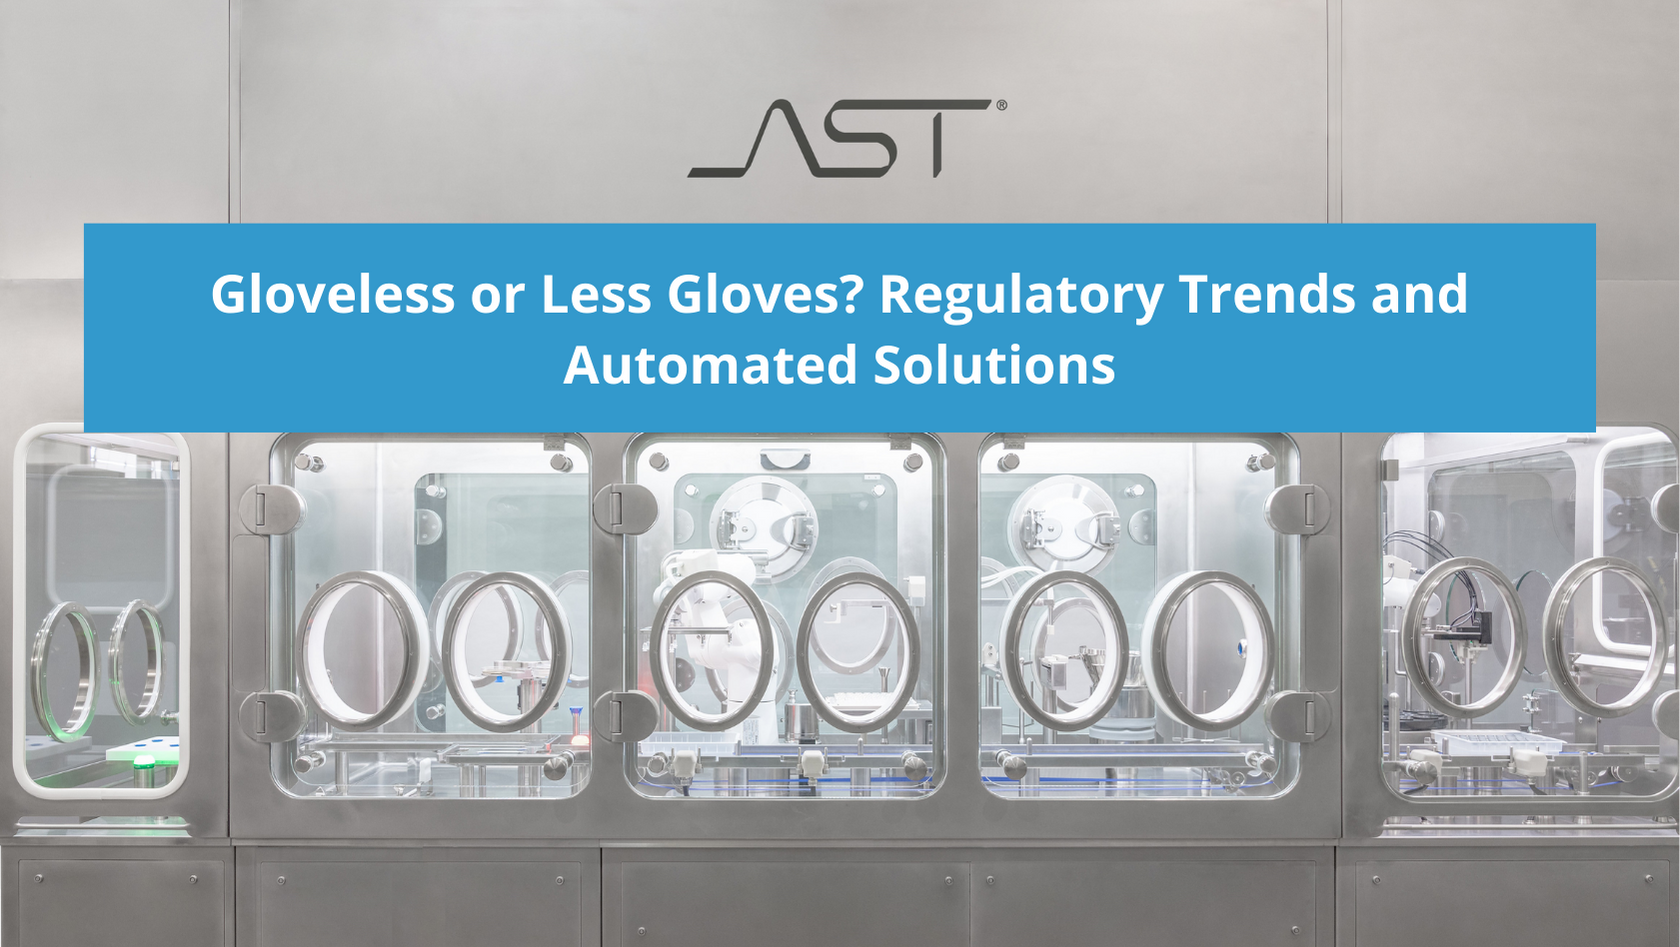 Gloveless or Less Gloves? Regulatory Trends and Automated Solutions